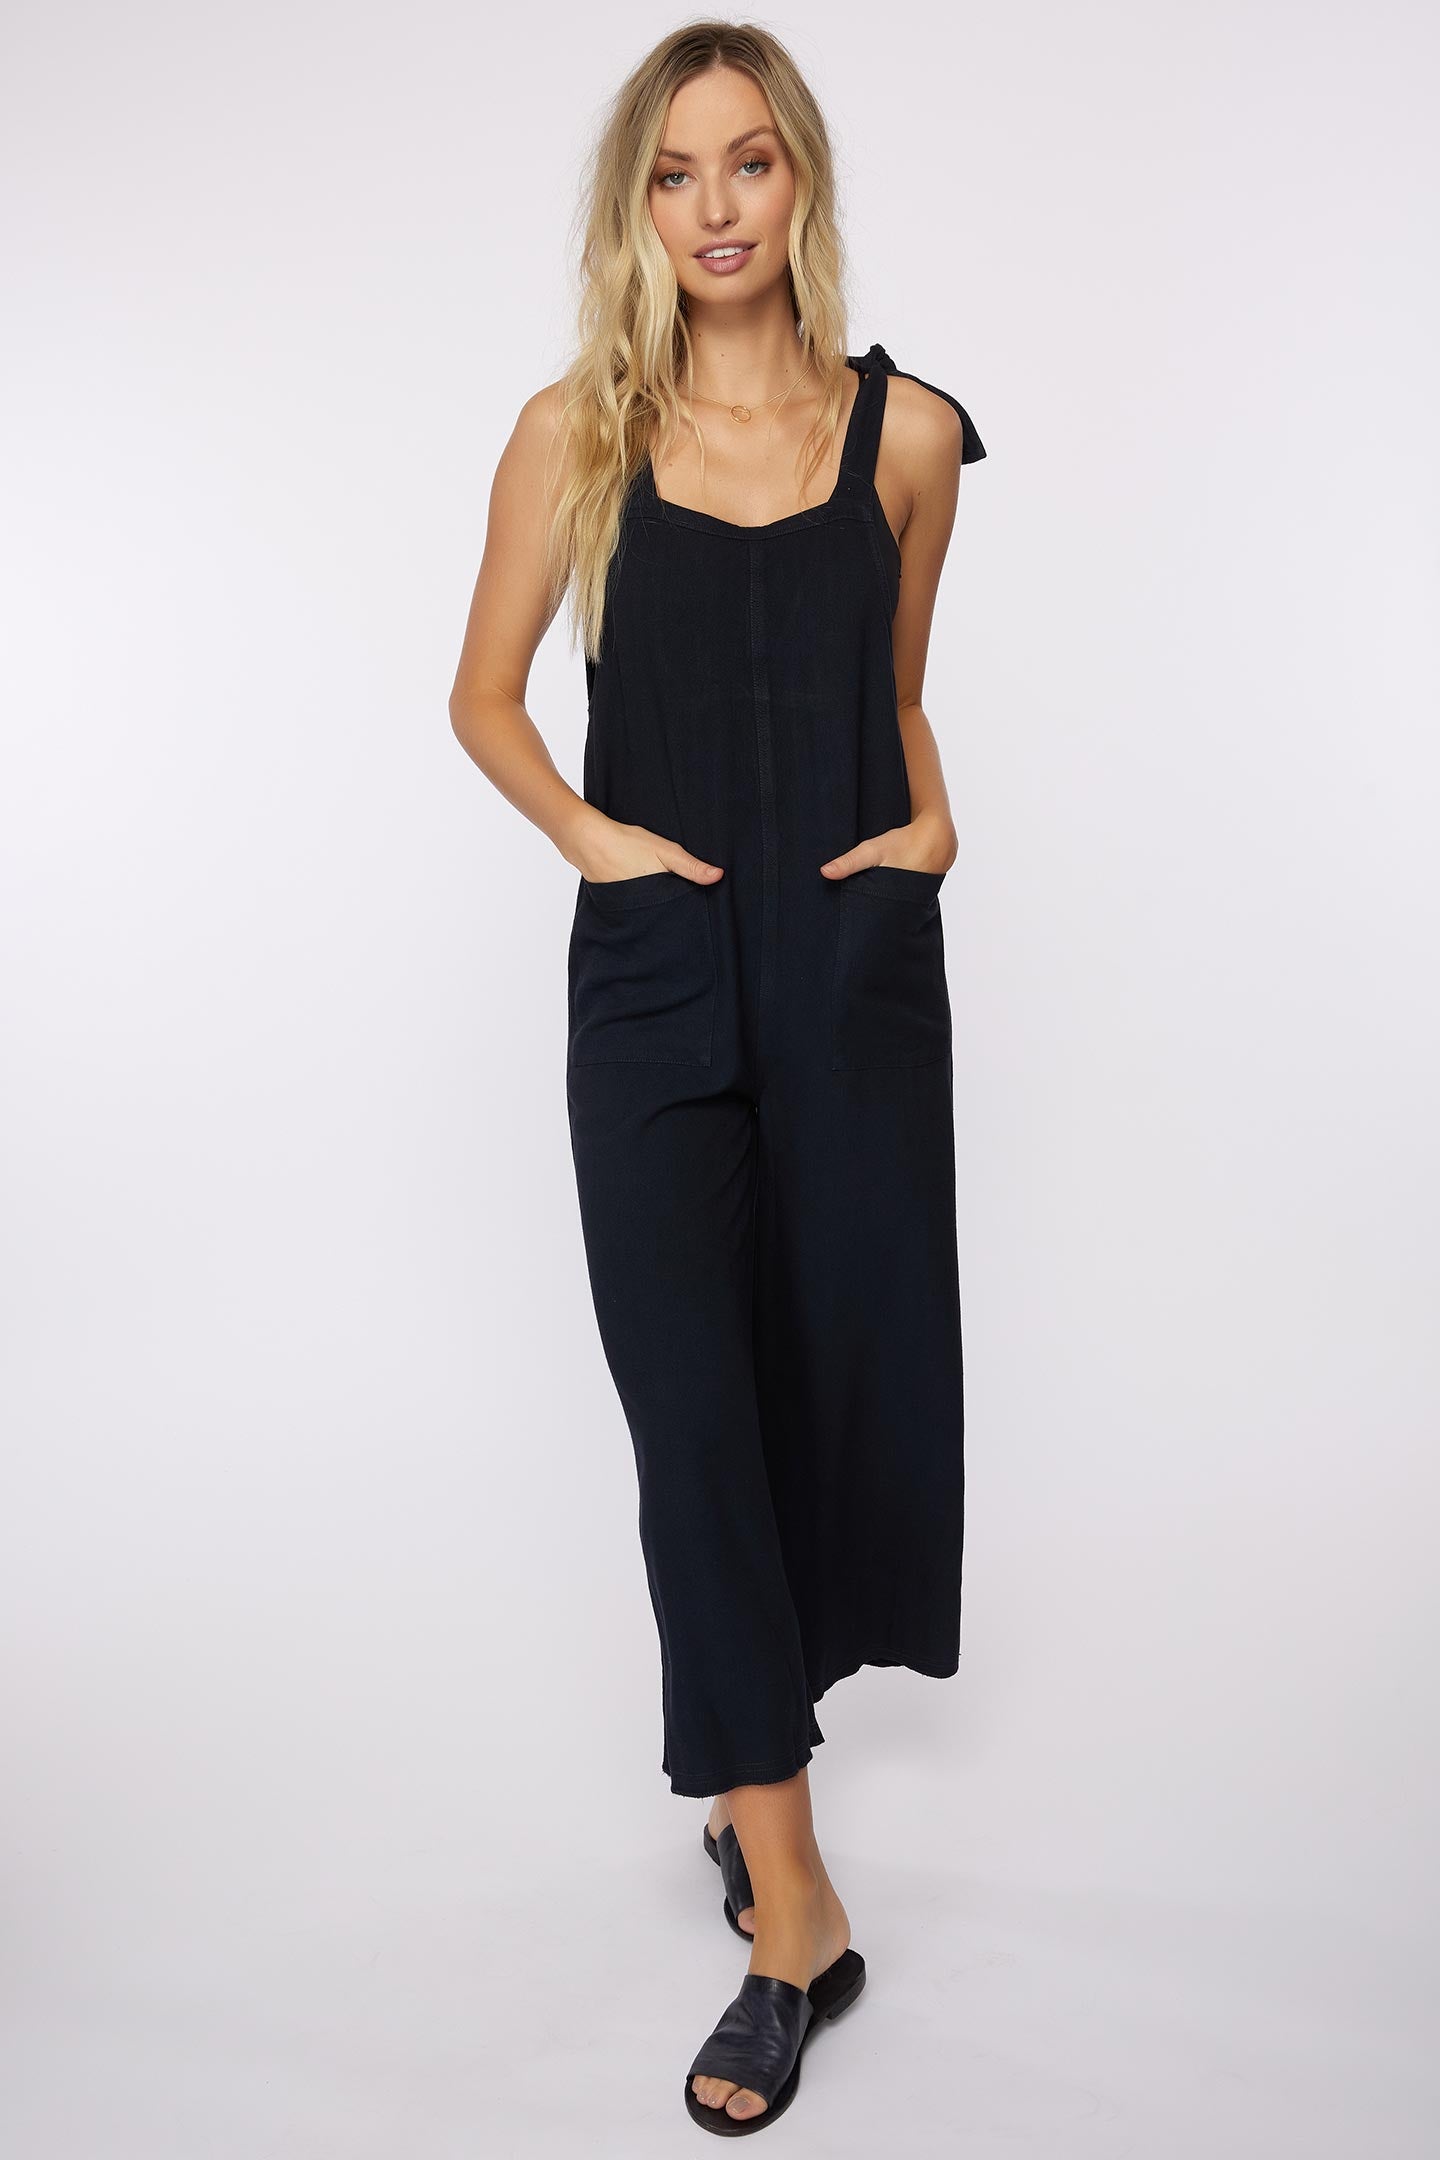 SOS Sportswear of Sweden Turtleneck Jumpsuit - Black, 9 Rise Jumpsuits and  Rompers, Clothing - WSOSO20011